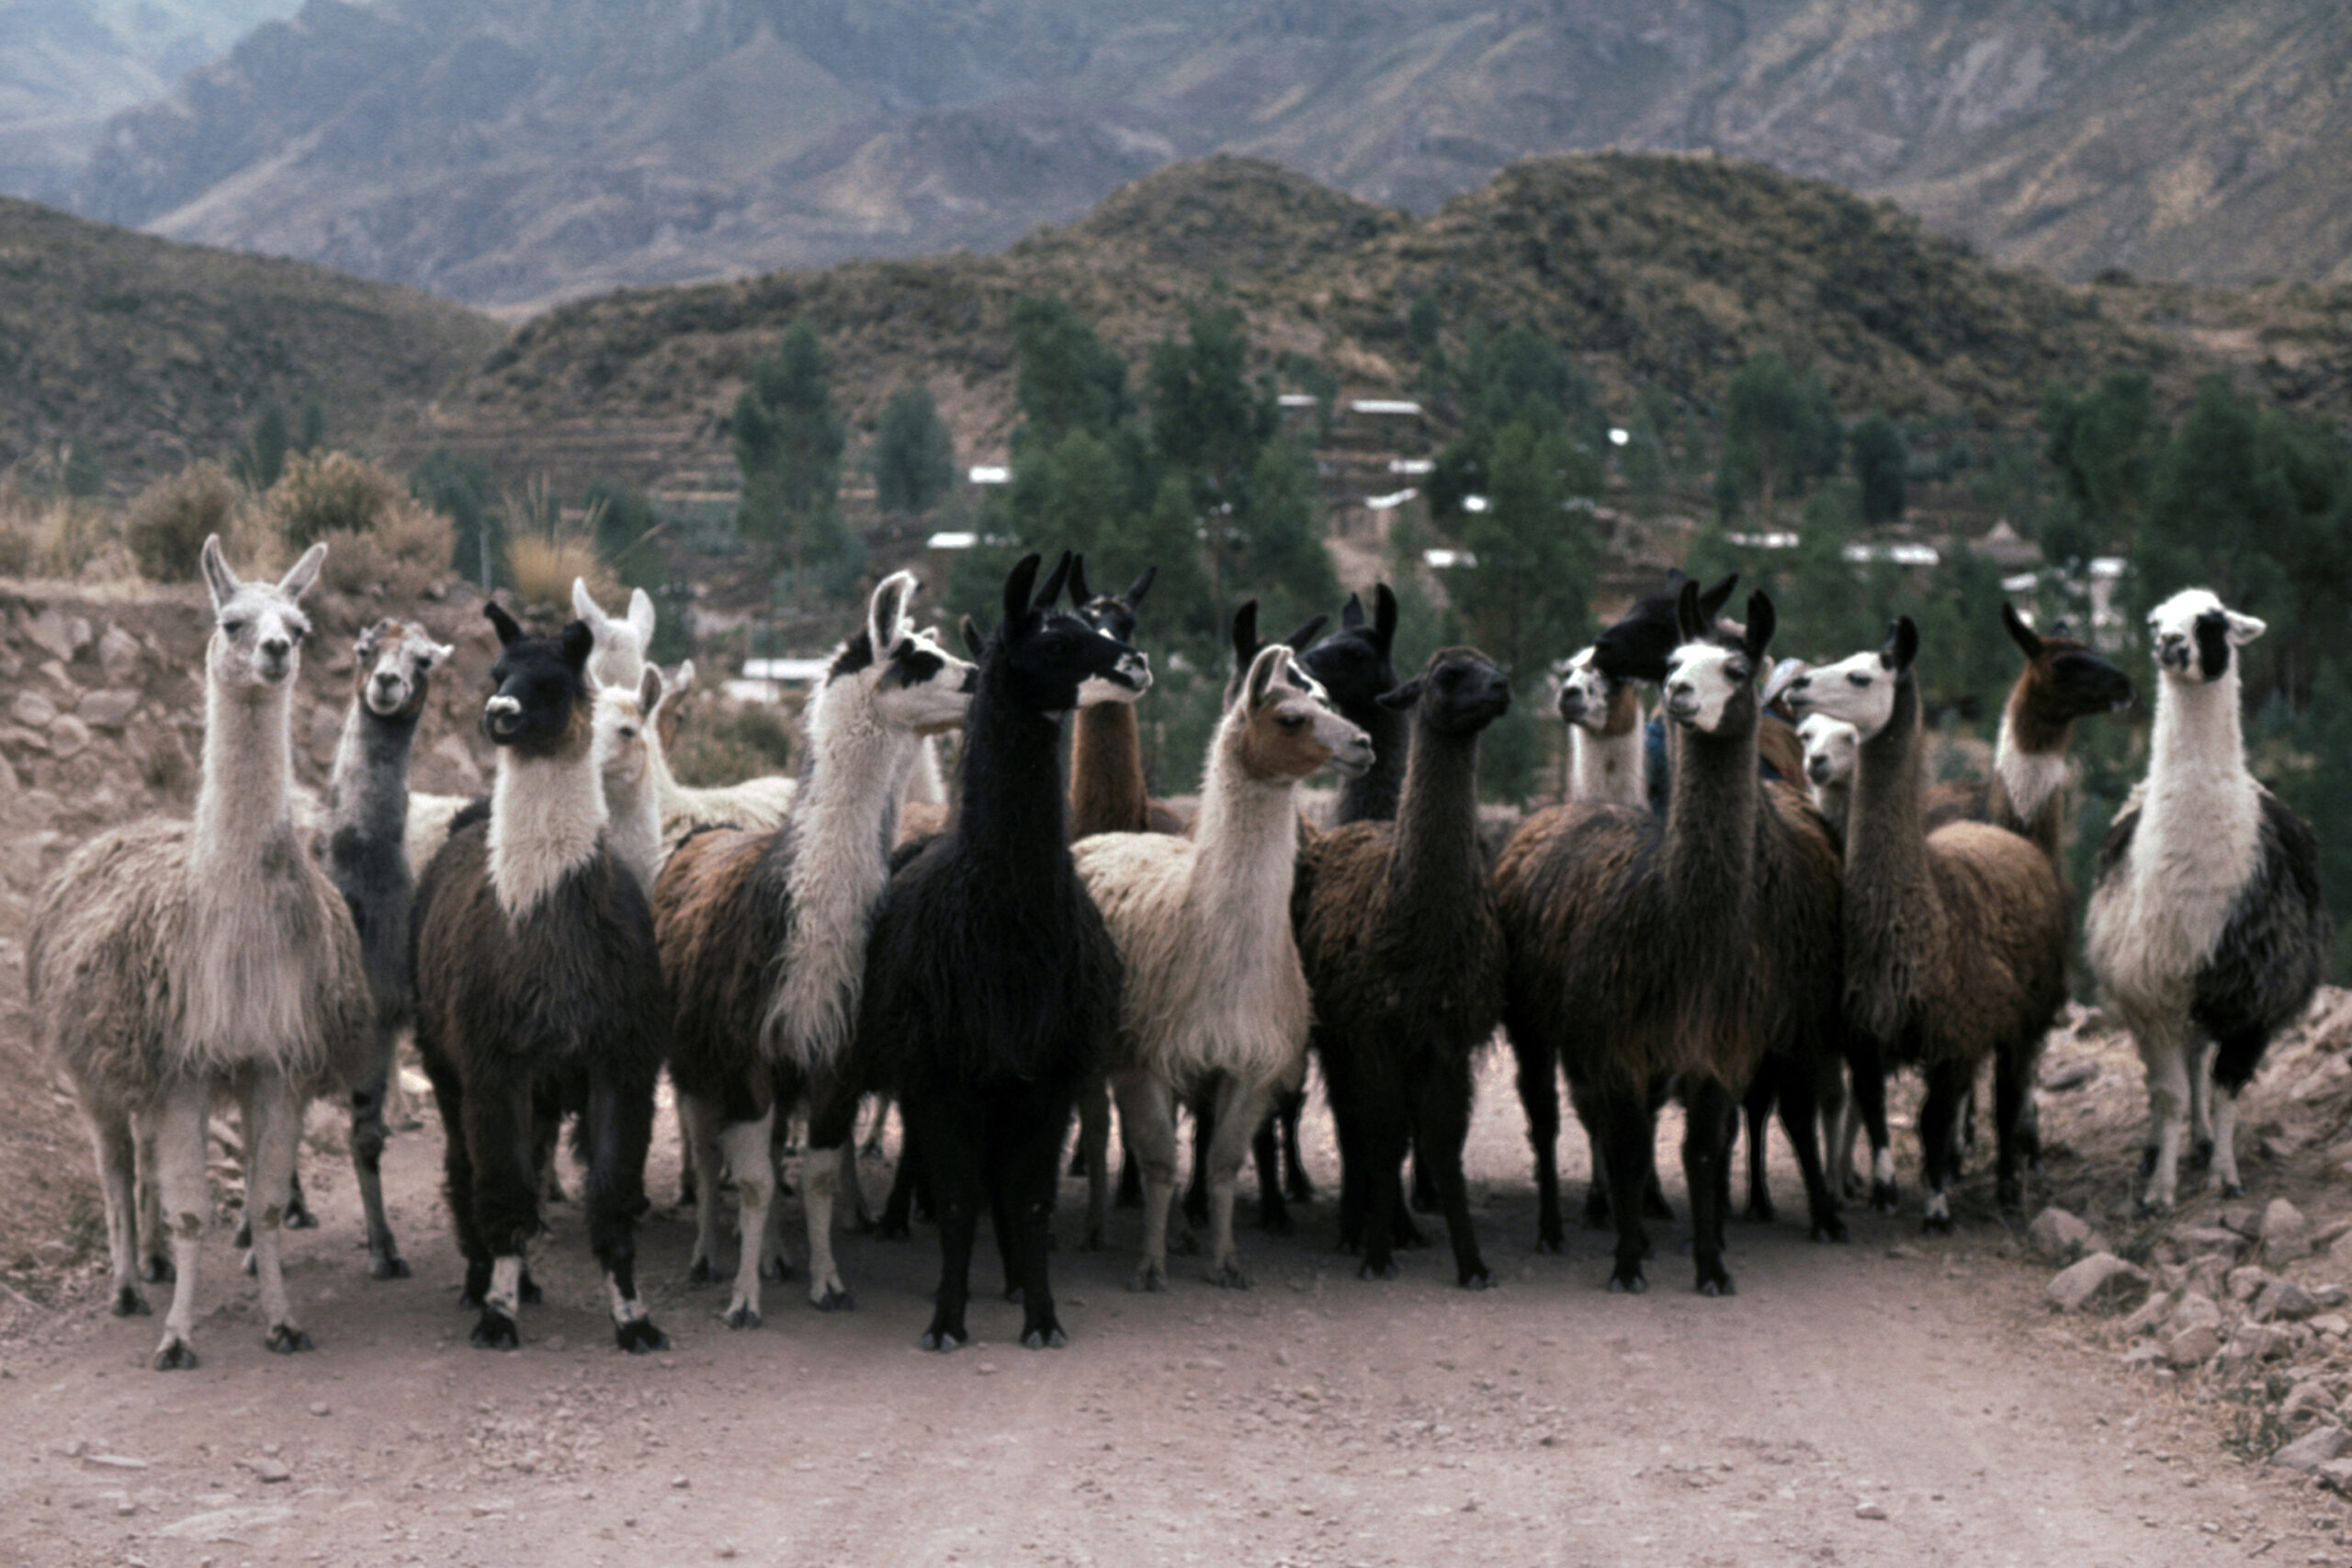 picture of a large group of llamas